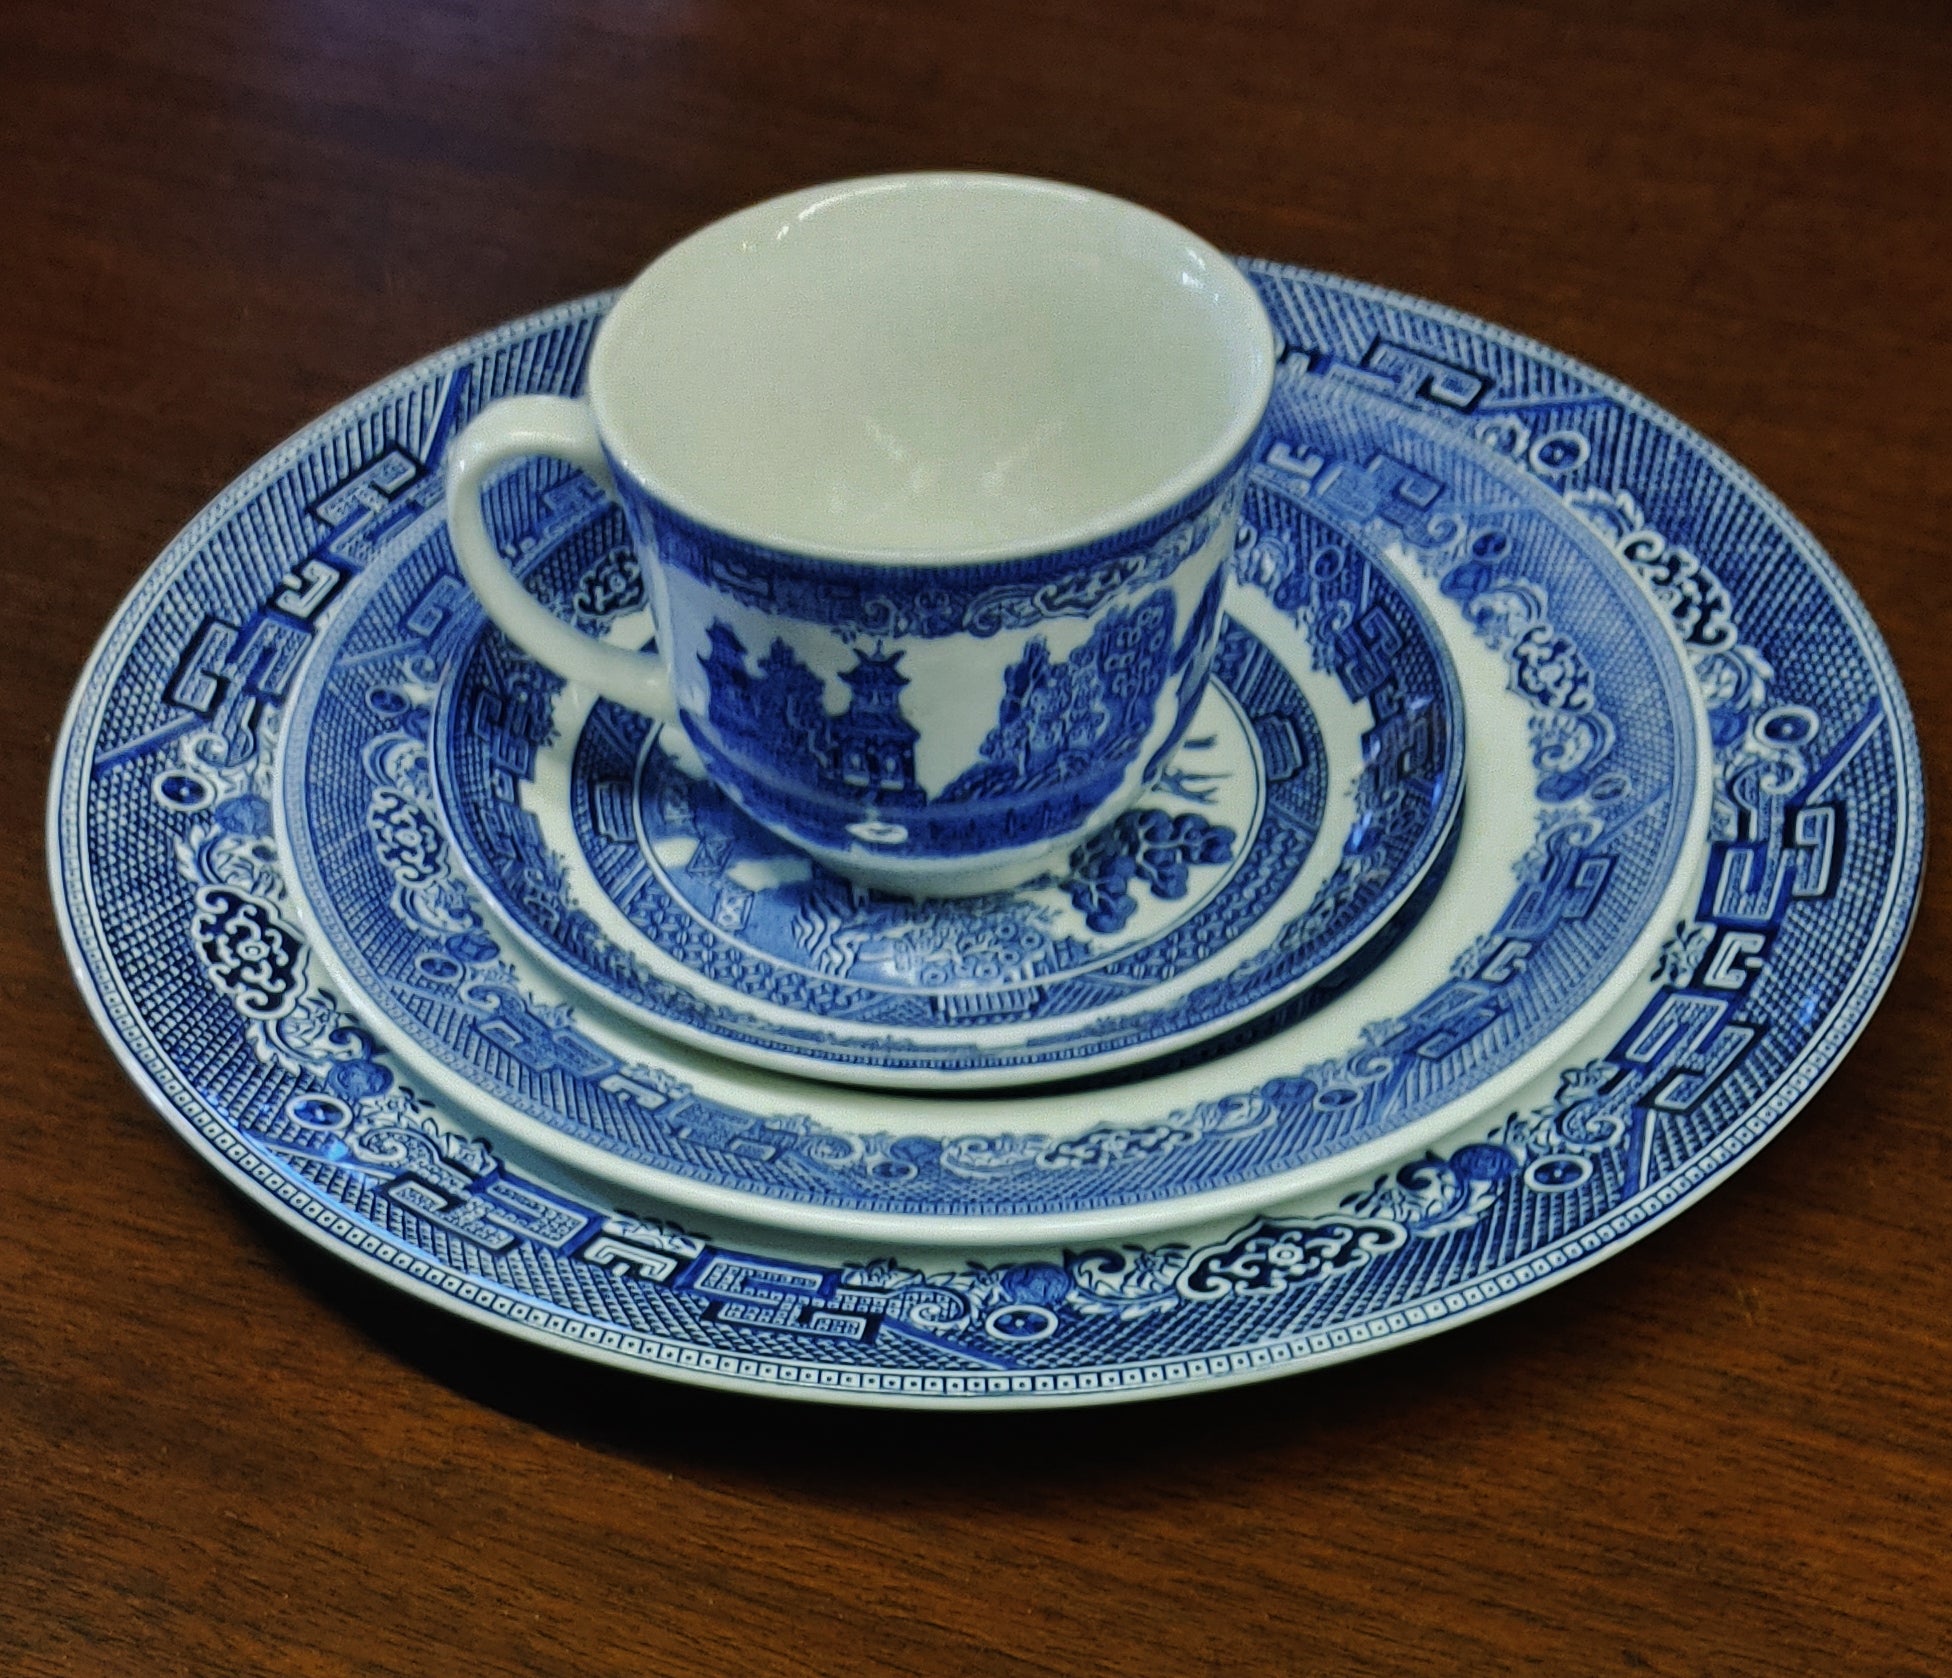 Blue Willow 4-pc Place Setting Johnson Brothers England Dishwasher Microwave Safe